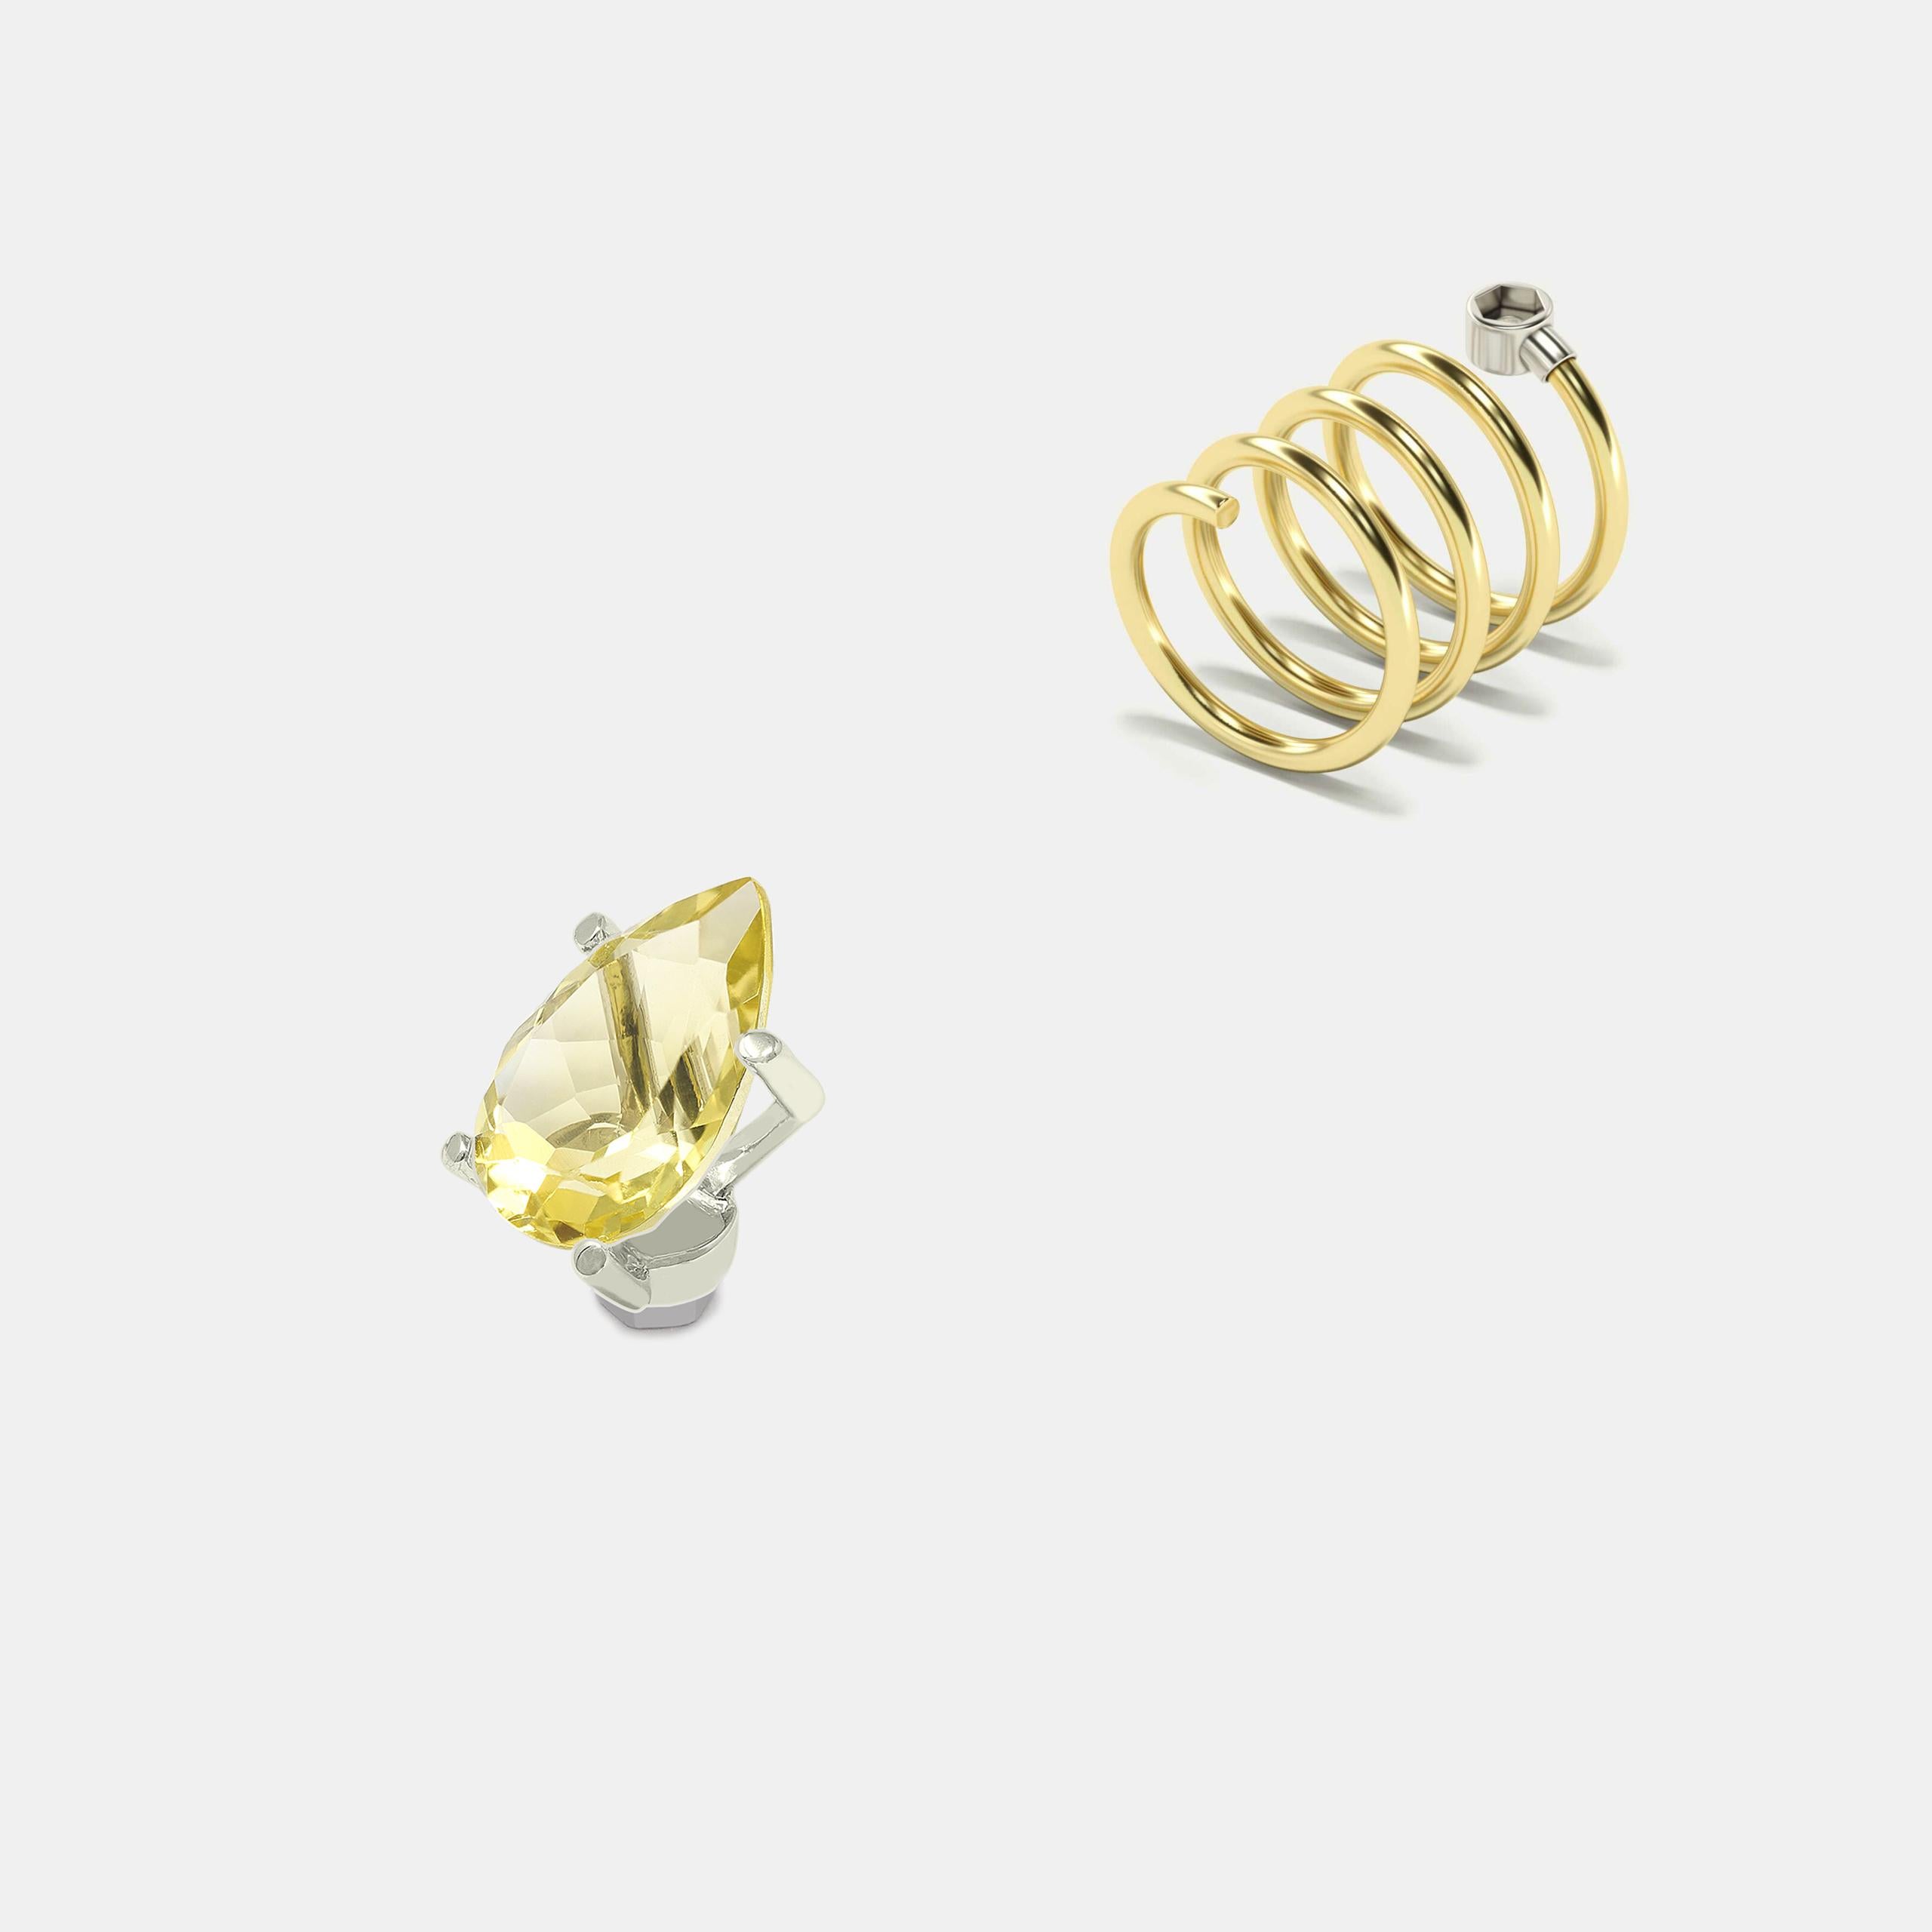 Lemon Quartz, pear cut, White Gold head, 18K
Elastic Spiral Yellow Gold Ring, 18K

ECH JEWELRY, Ode to the Revolution in Fine Jewelry!  
You can add or remove the Lemon Quartz stone from the ring.
This is only possible with a surgical steel